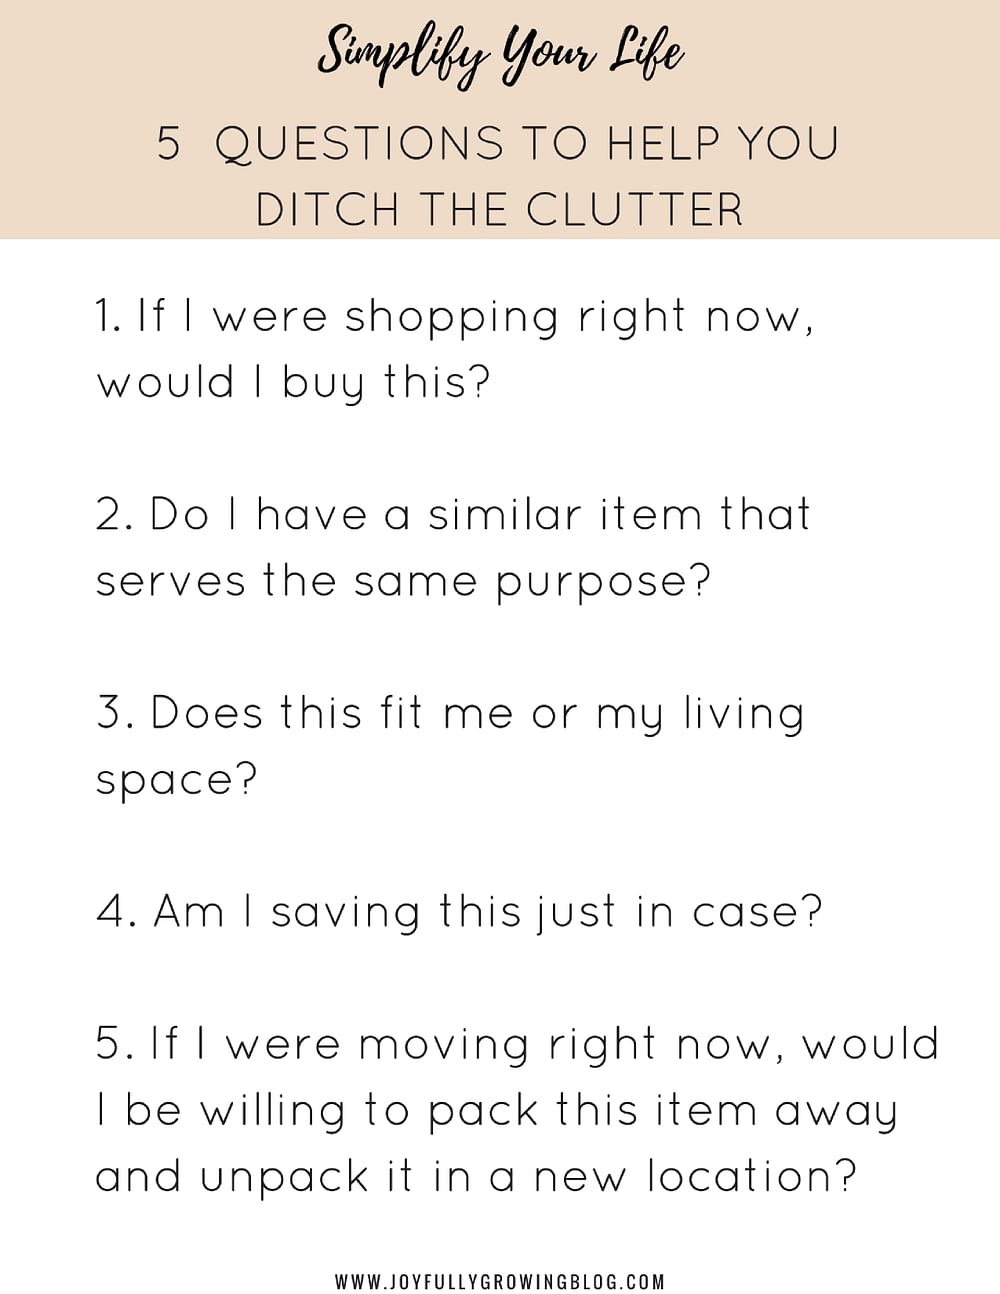 5 Questions to Help You Ditch the Clutter | Simplify Your Life - Part 1